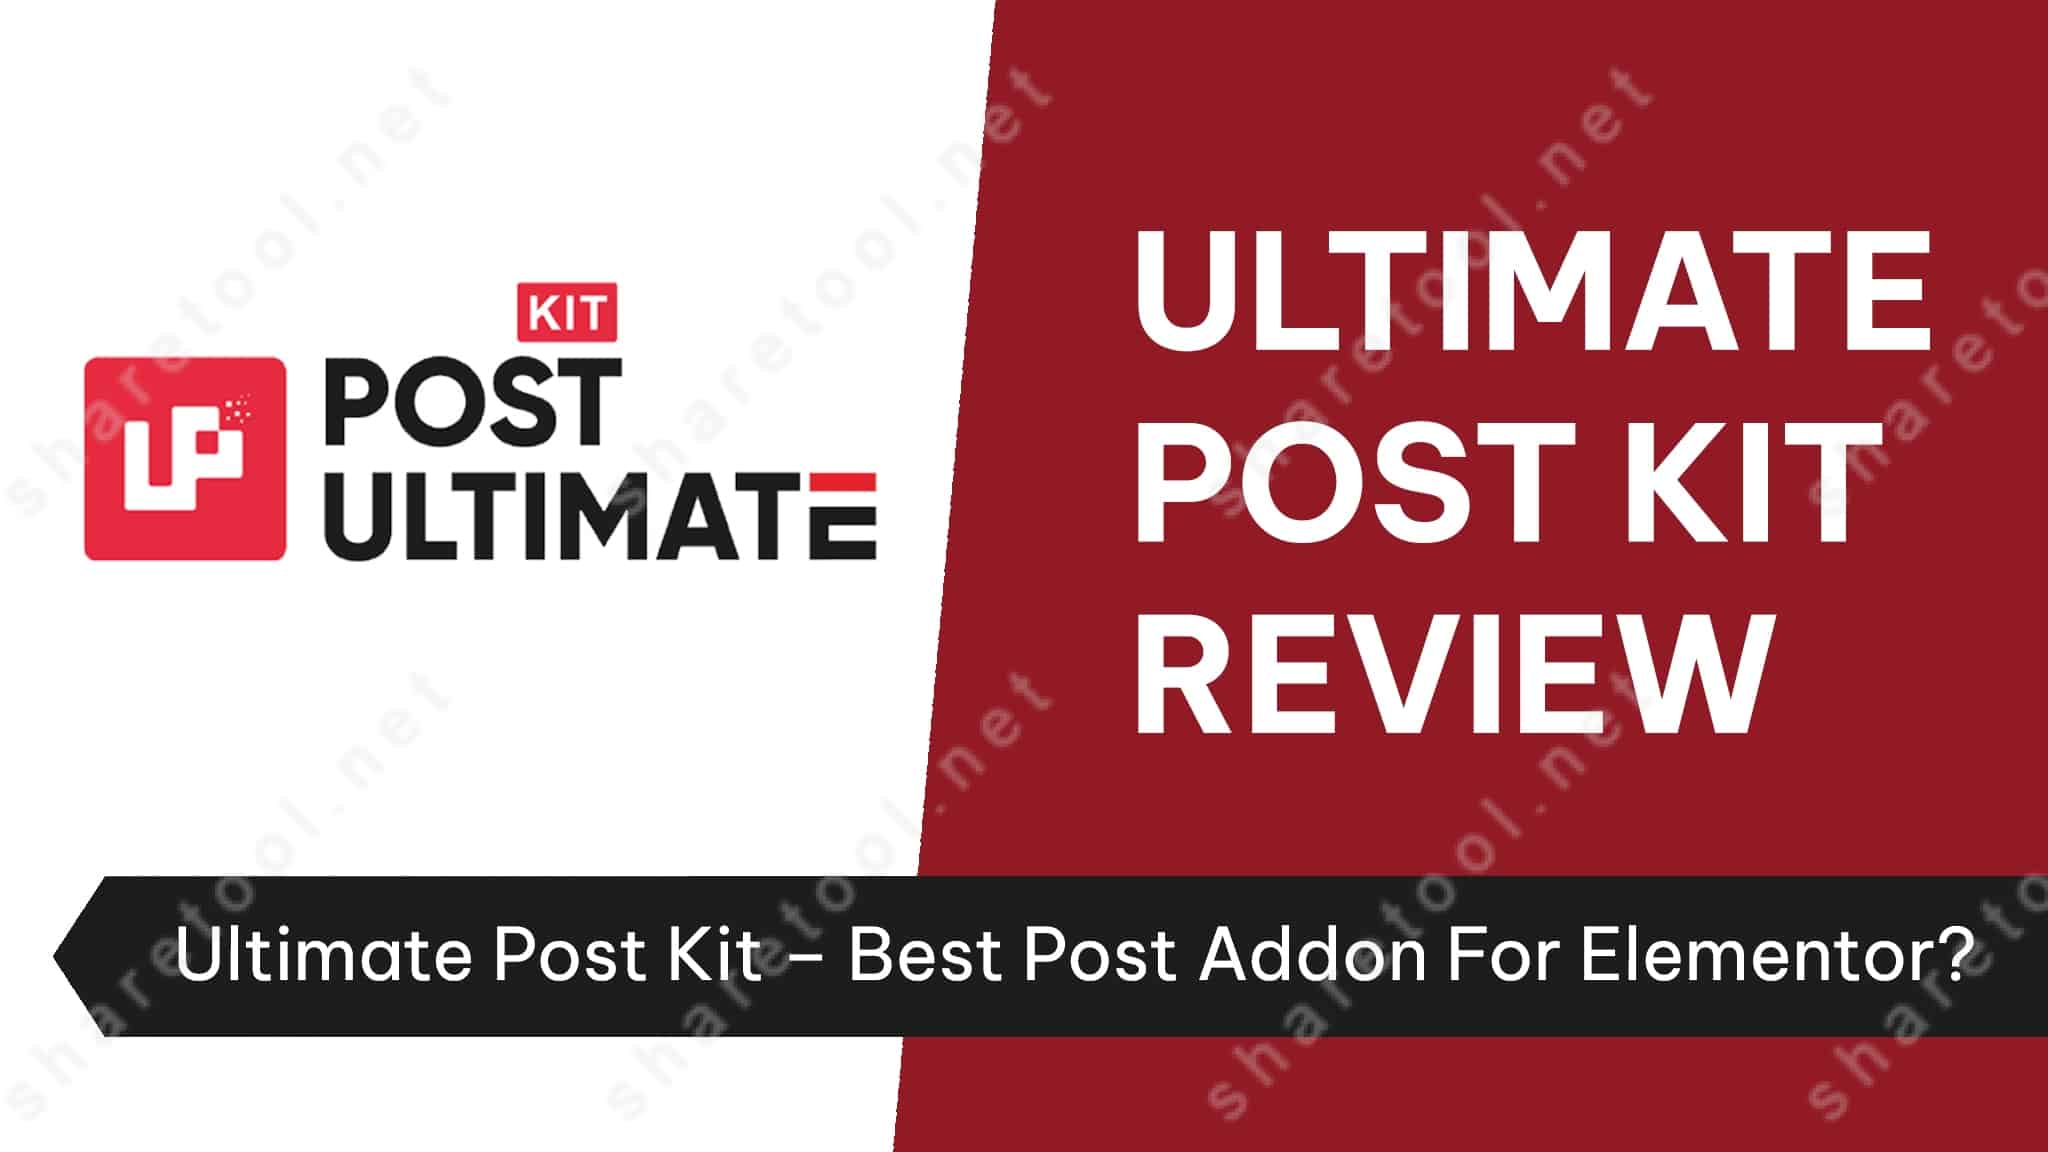 Ultimate Post Kit Review